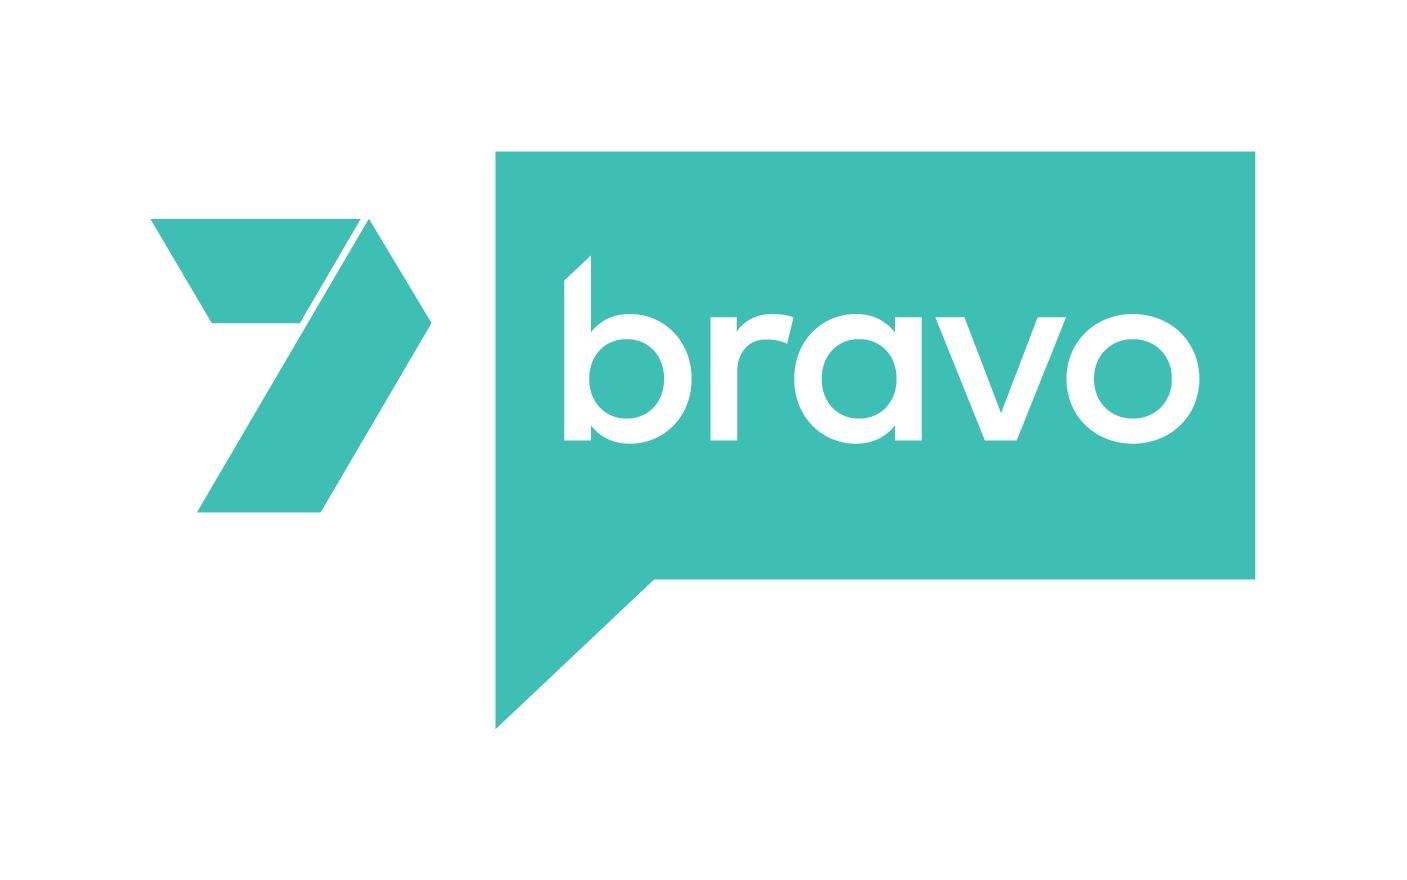 New Seven and NBCUniversal channel 7Bravo scores with viewers